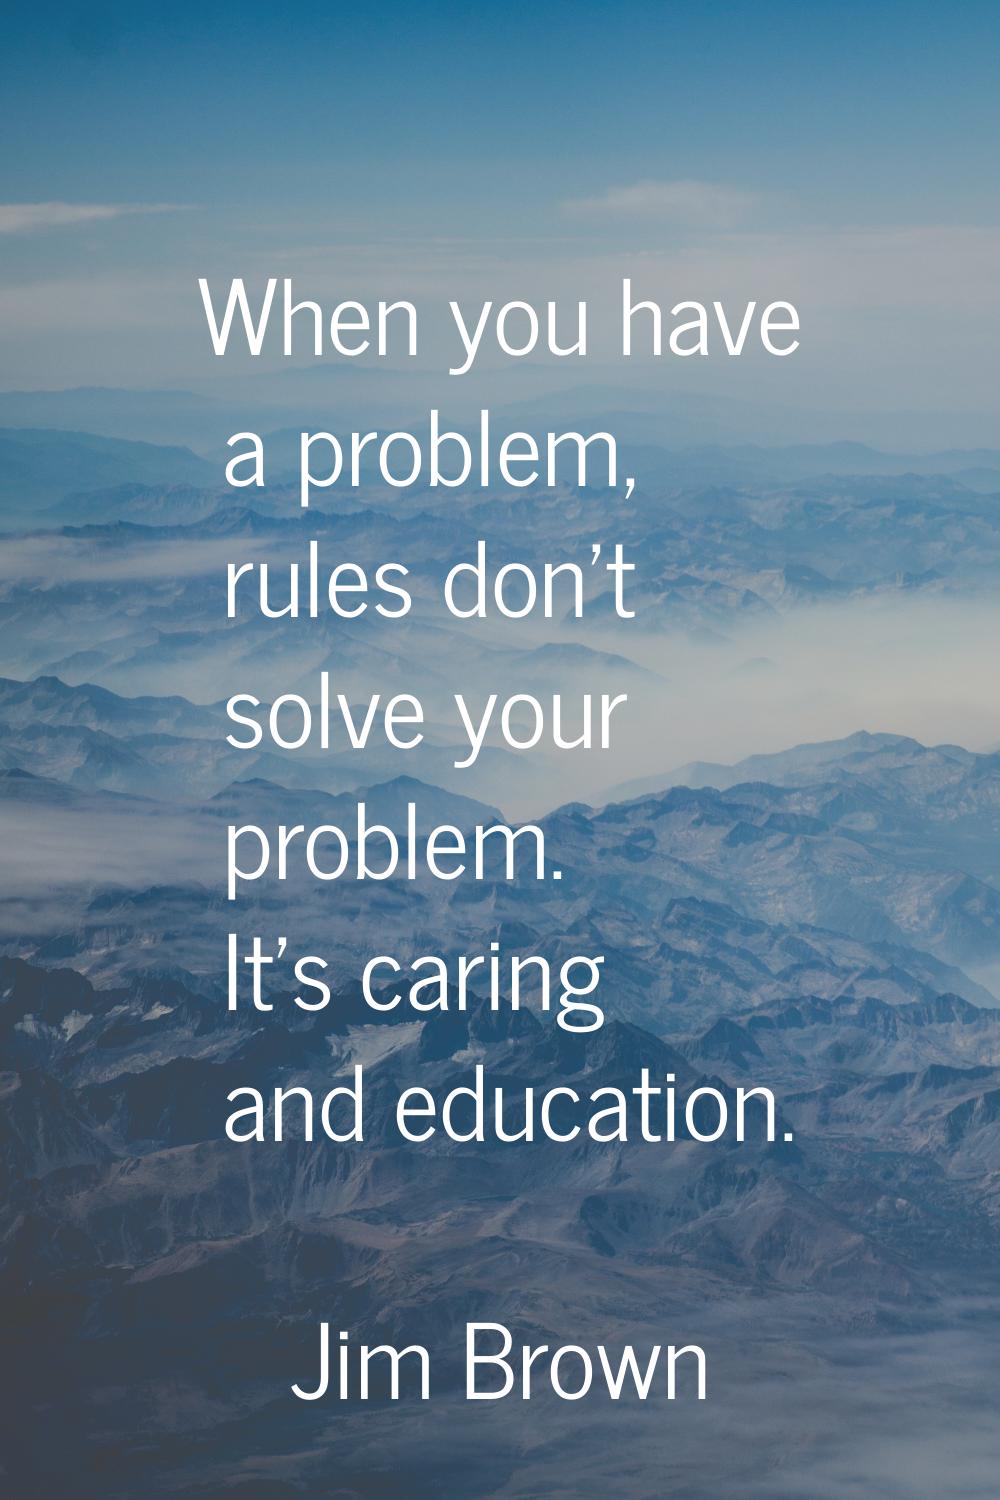 When you have a problem, rules don't solve your problem. It's caring and education.